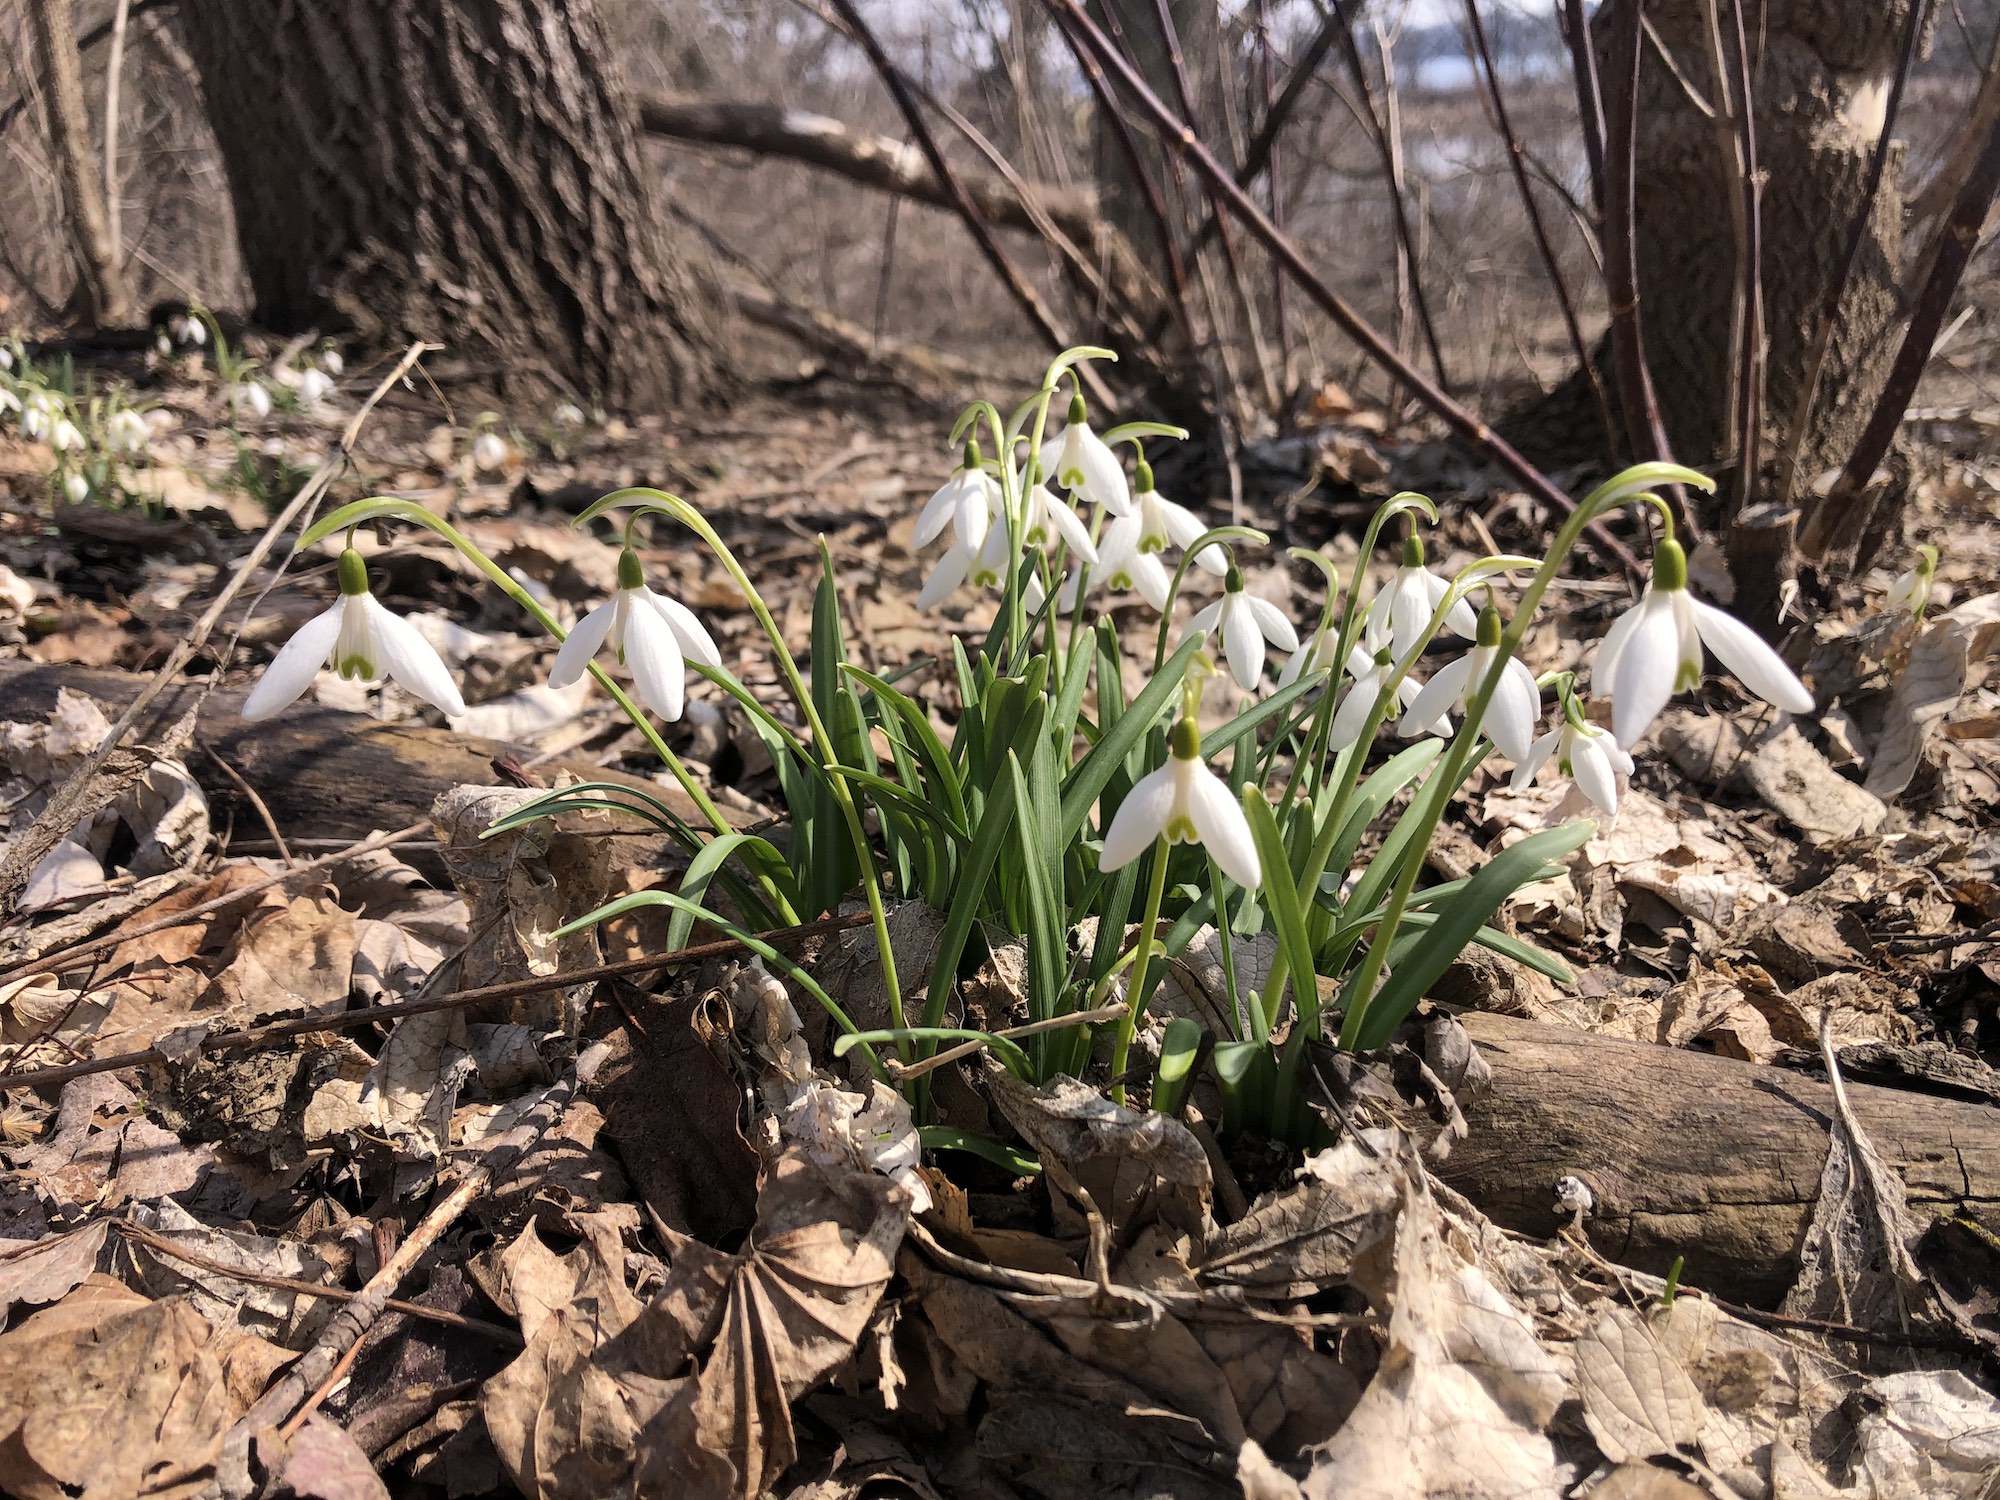 Snowdrops in Madison Wisconsin along Arbor Drive on March 21, 2023.